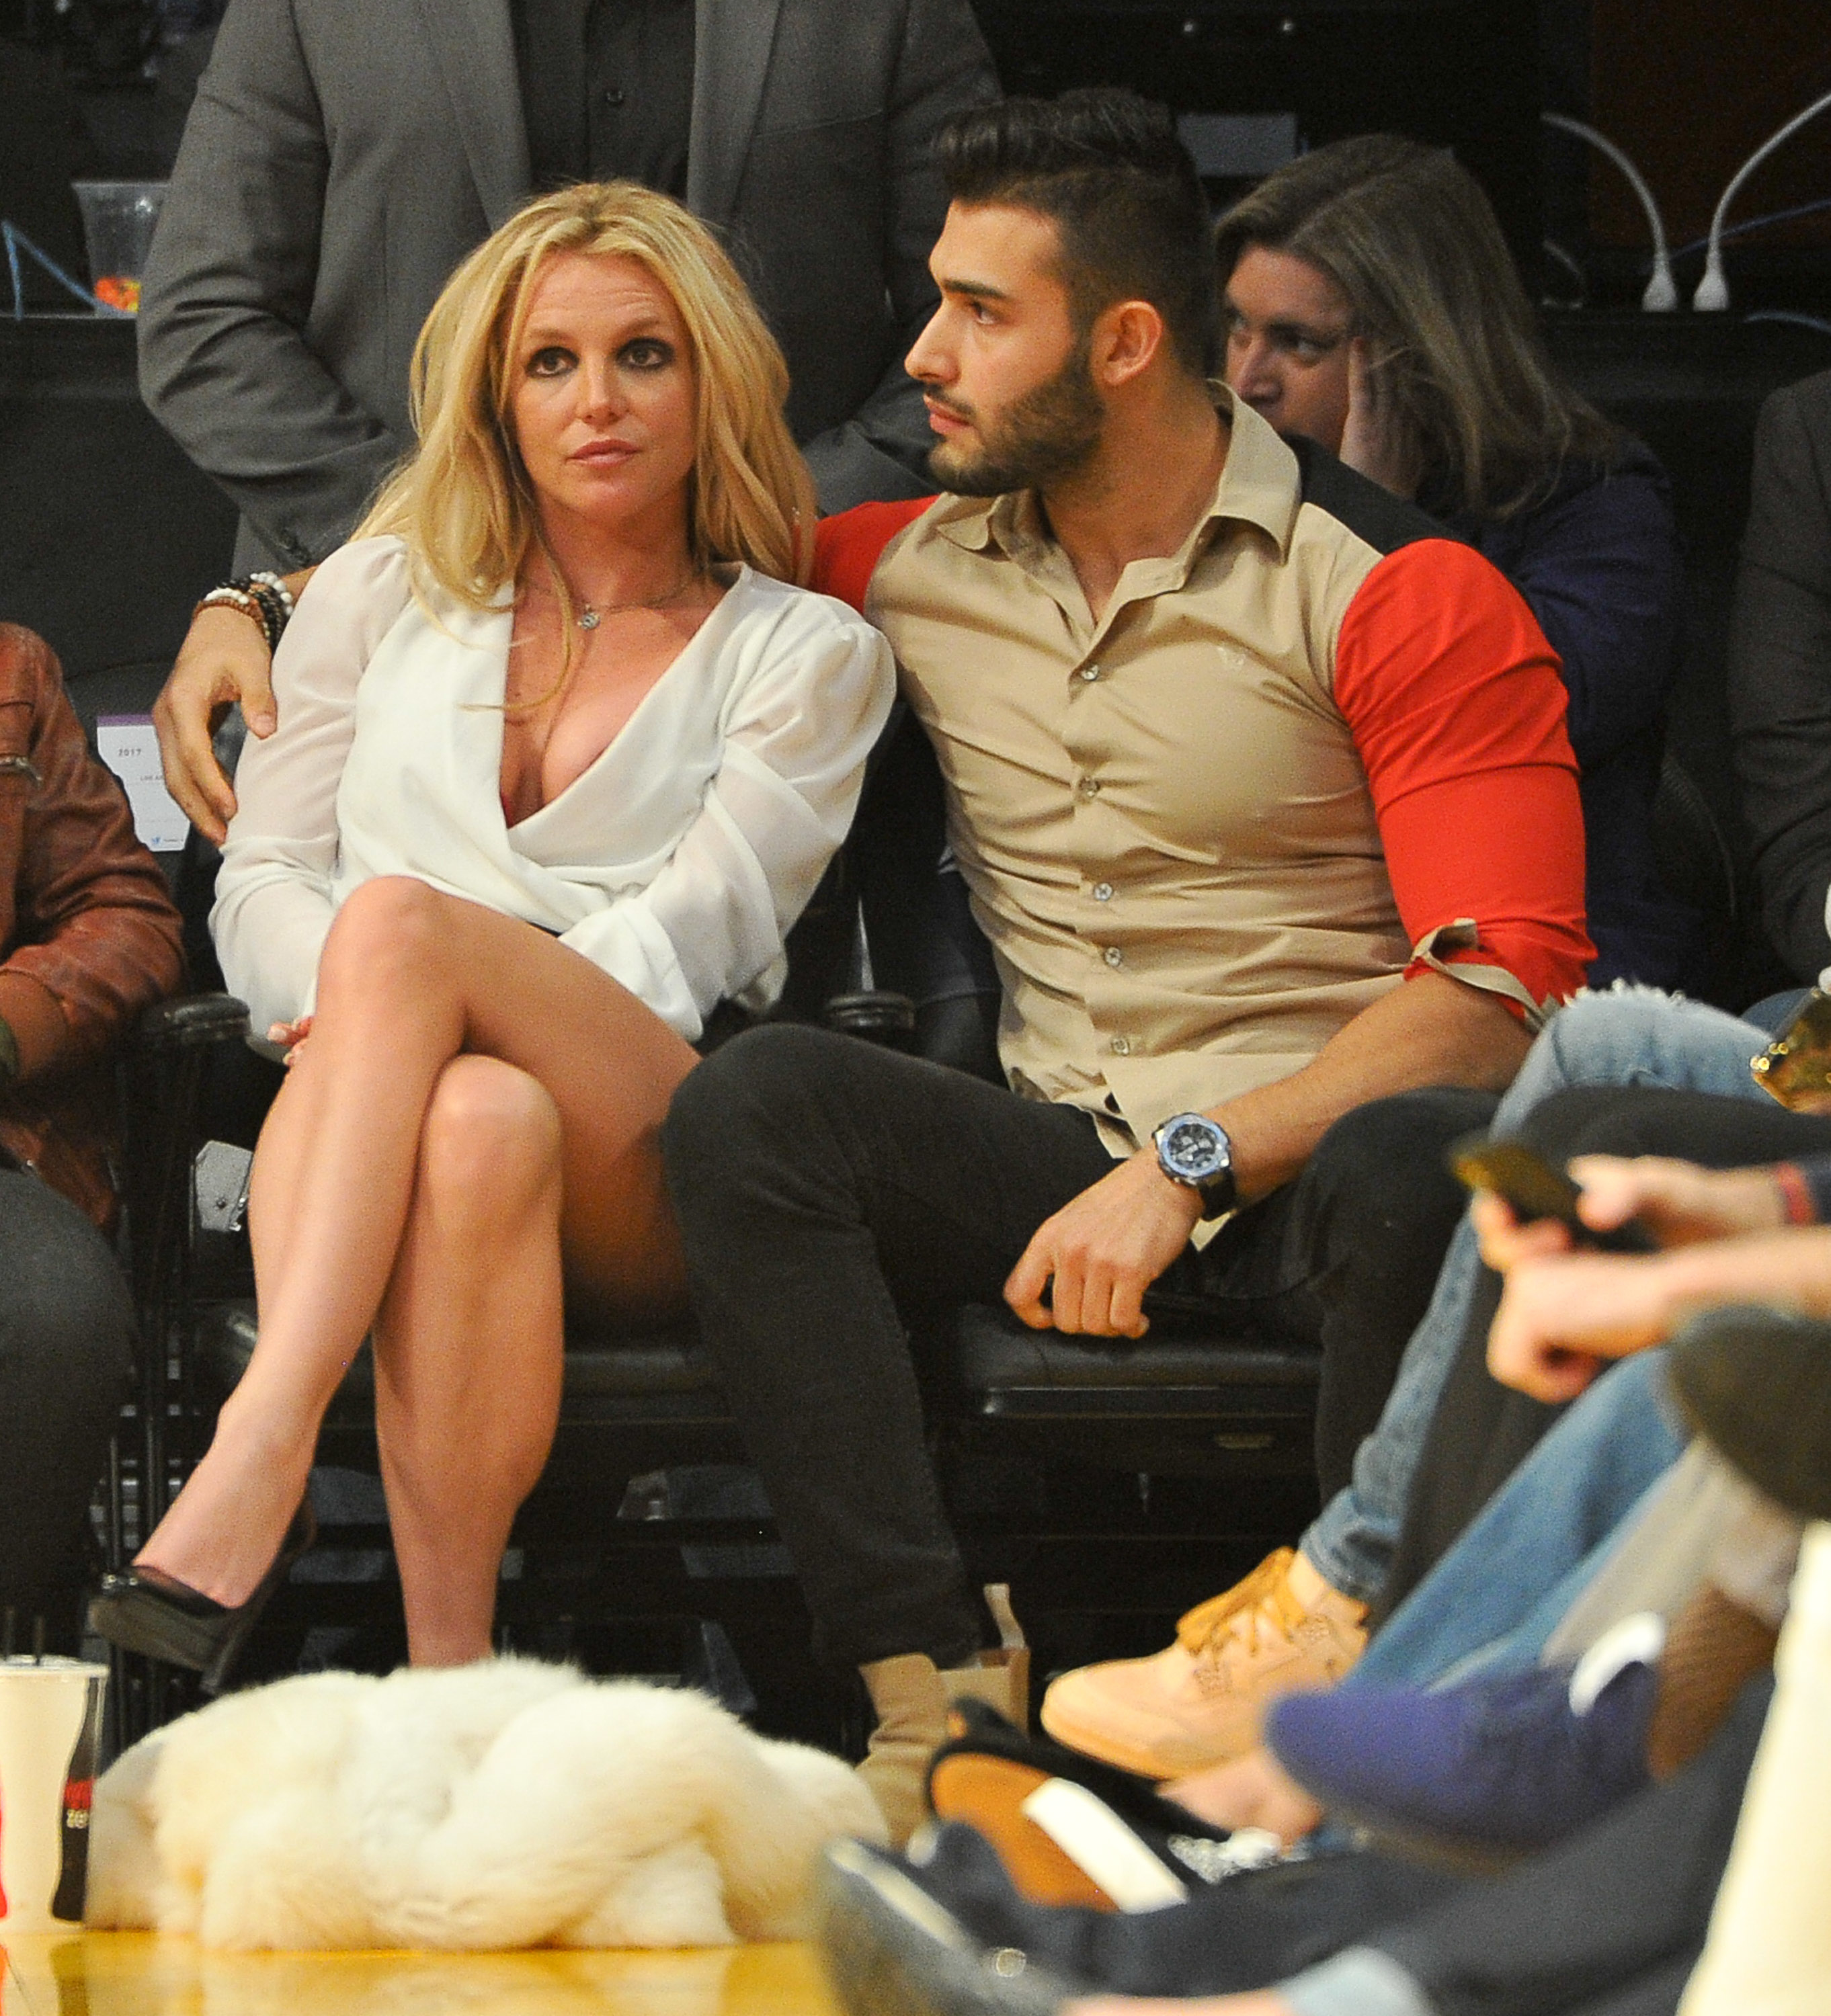 Close-up of Britney and Sam sitting together in the audience at a sports event